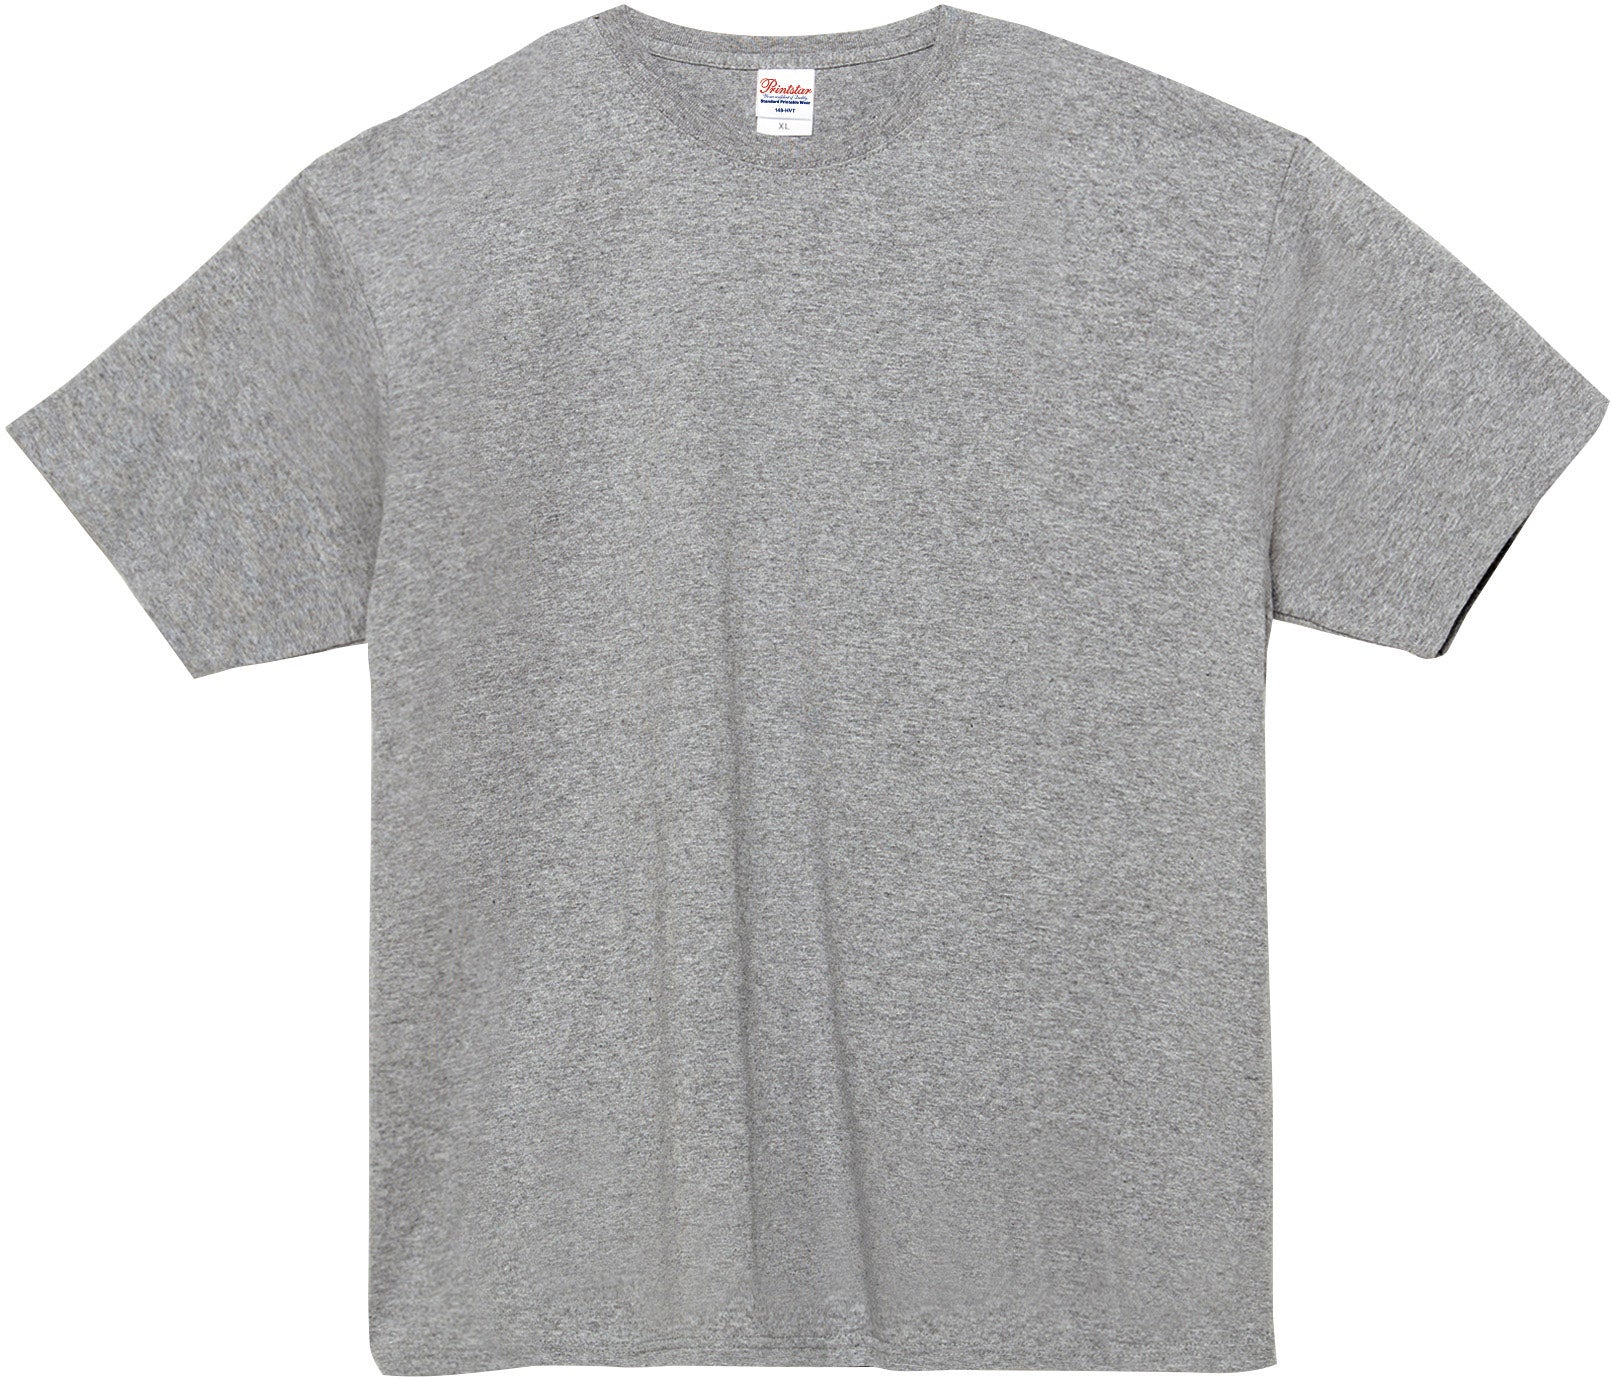 Printstar [*00148-HVT] 7.4 Apparel T-shirts – Merchandise Sustainable Weight oz Heavy Super and Corporate